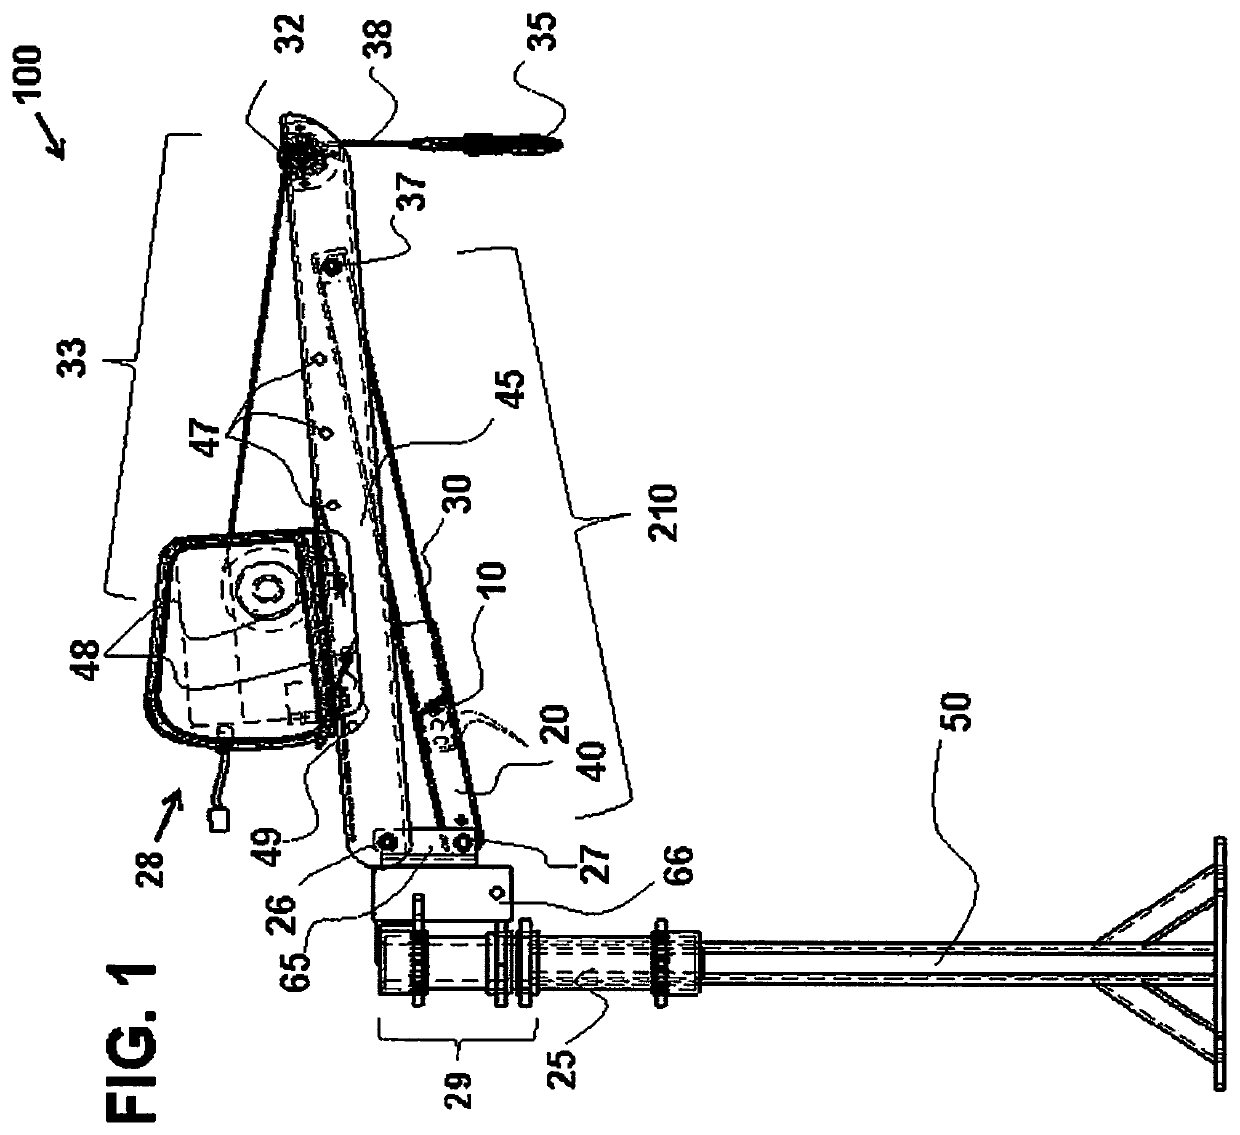 Portable hoist system with adjustment features